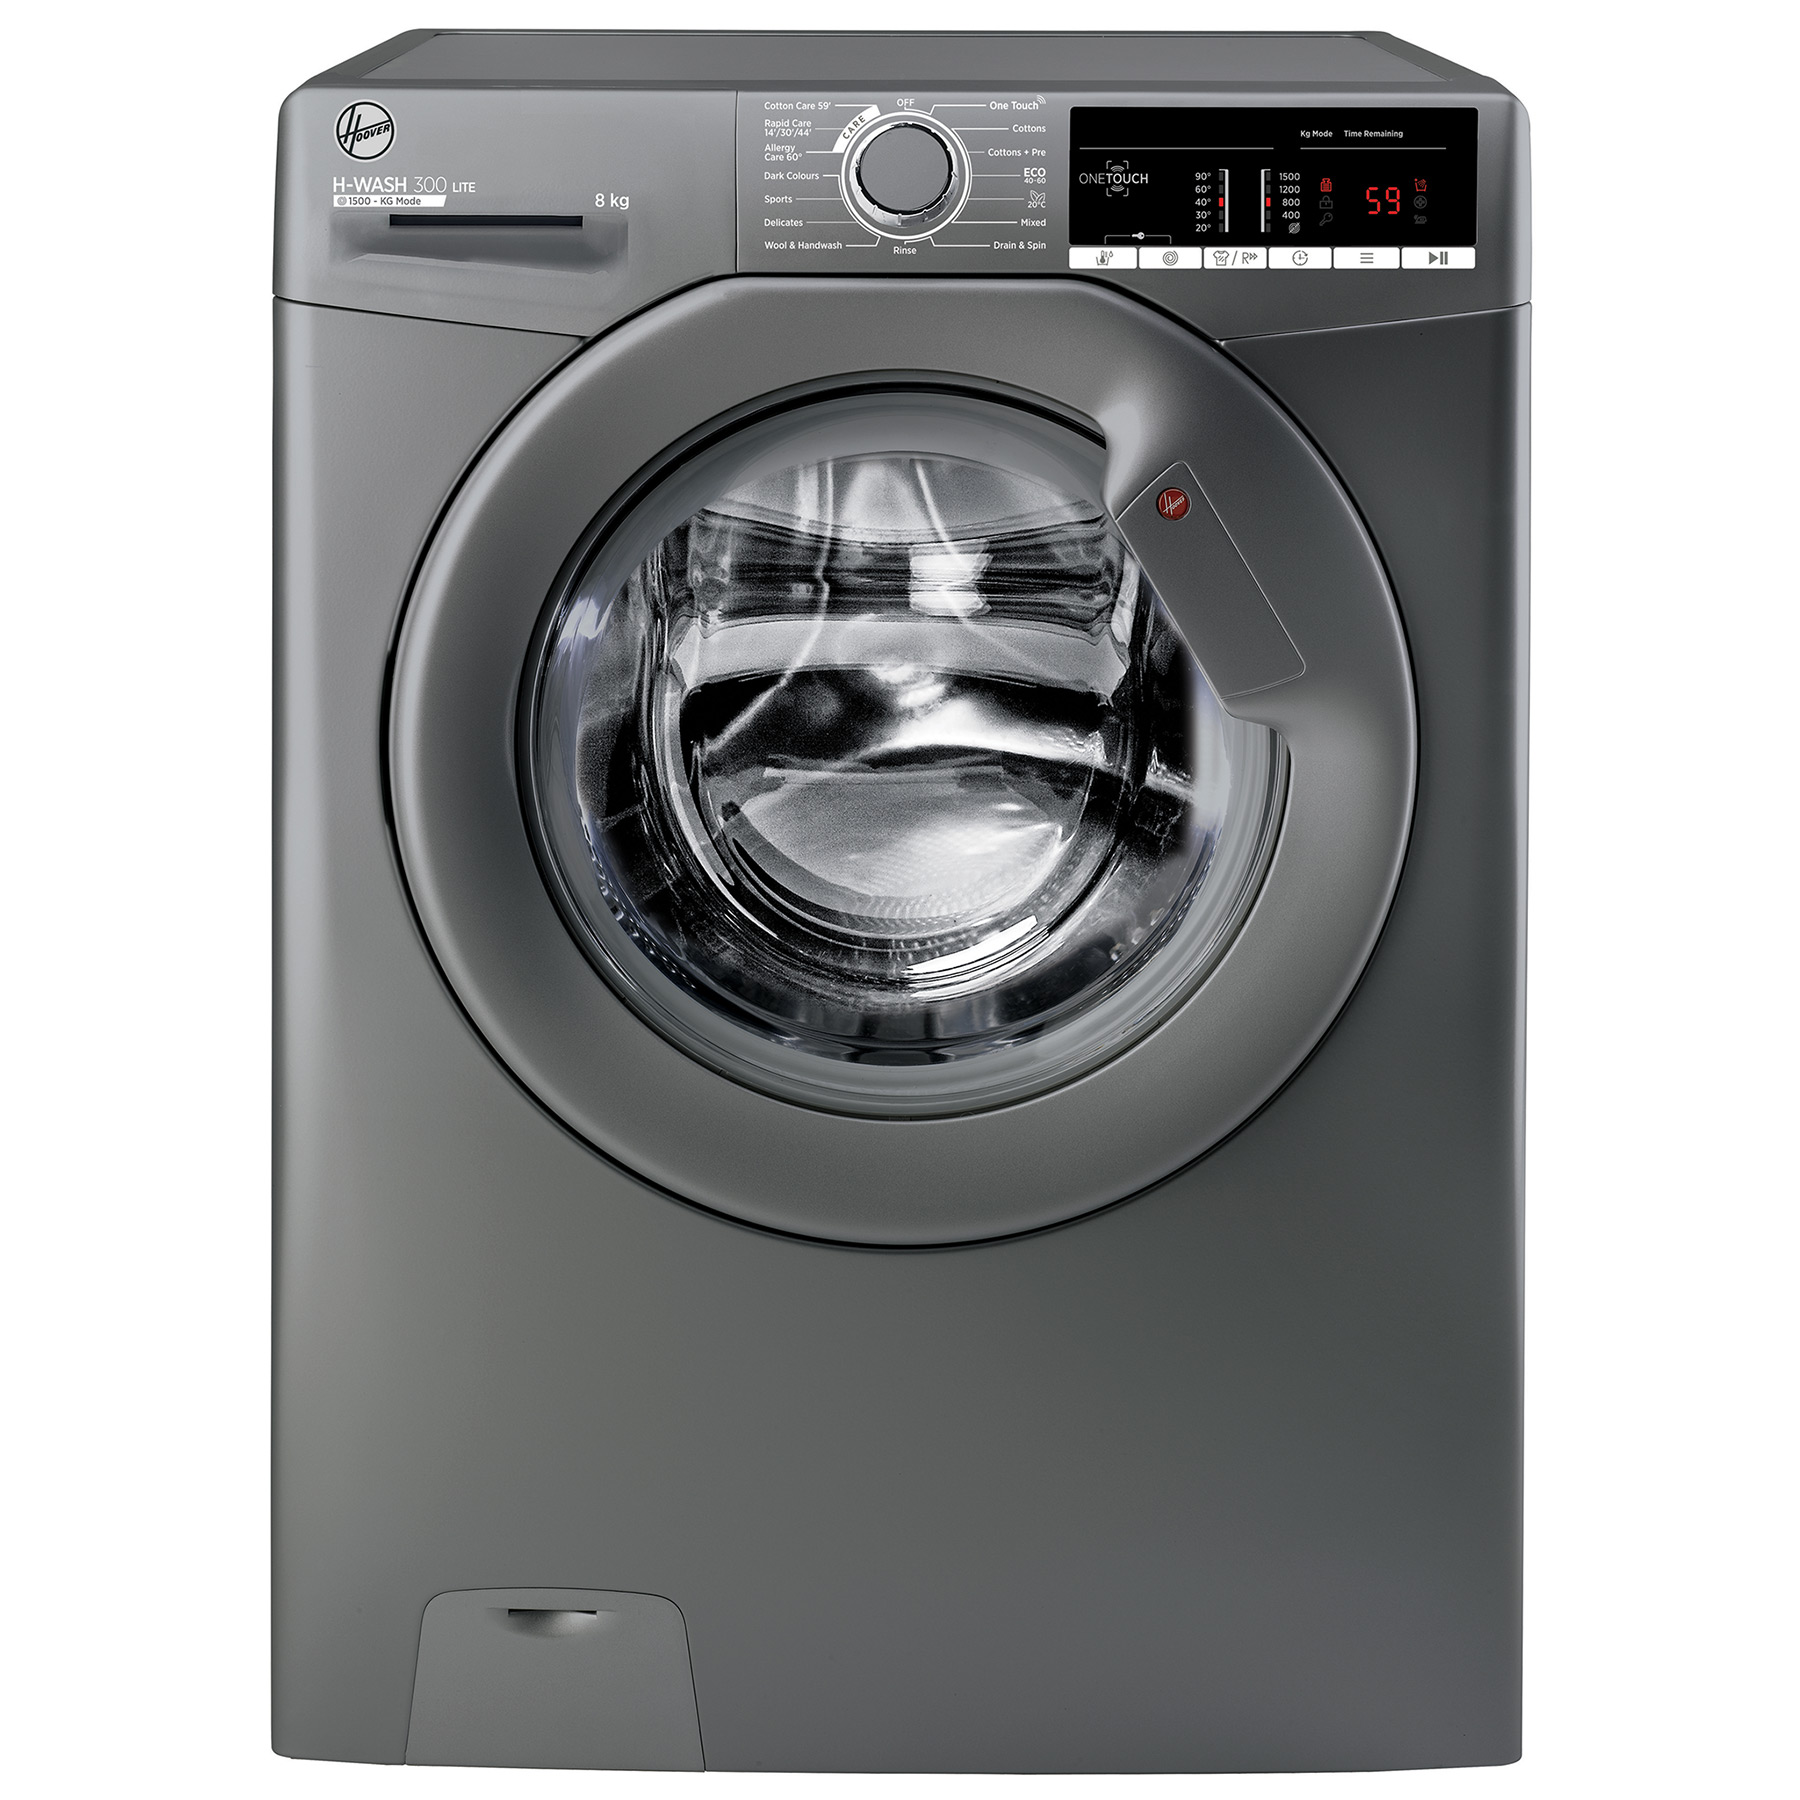 Hoover H3W58TGGE Washing Machine in Graphite 1500rpm 8Kg D Rated